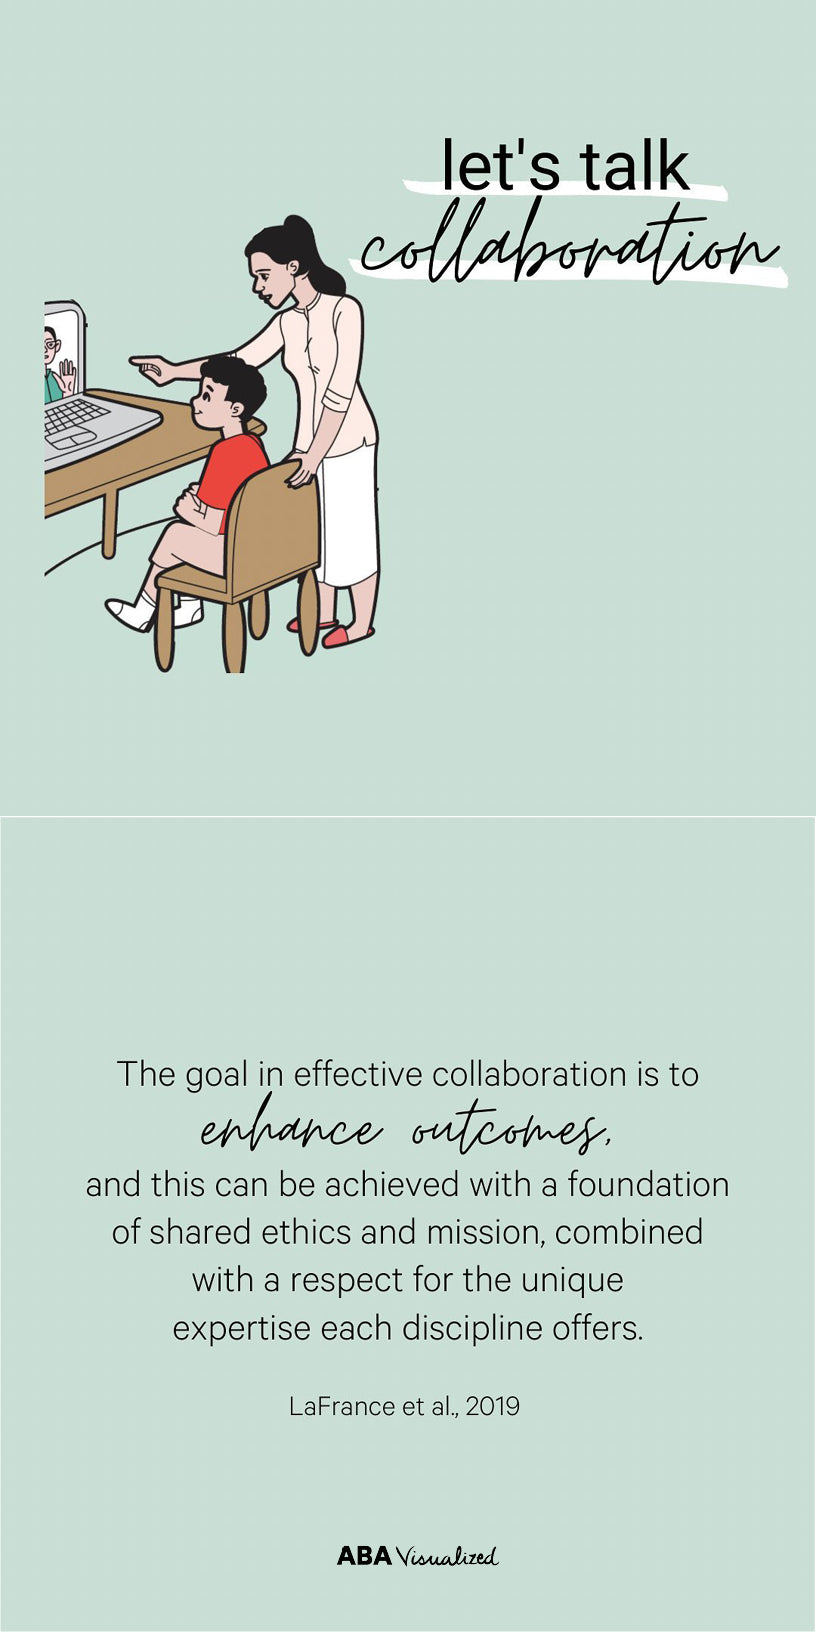 An ABA infographic from ABA Visualized - collaboration